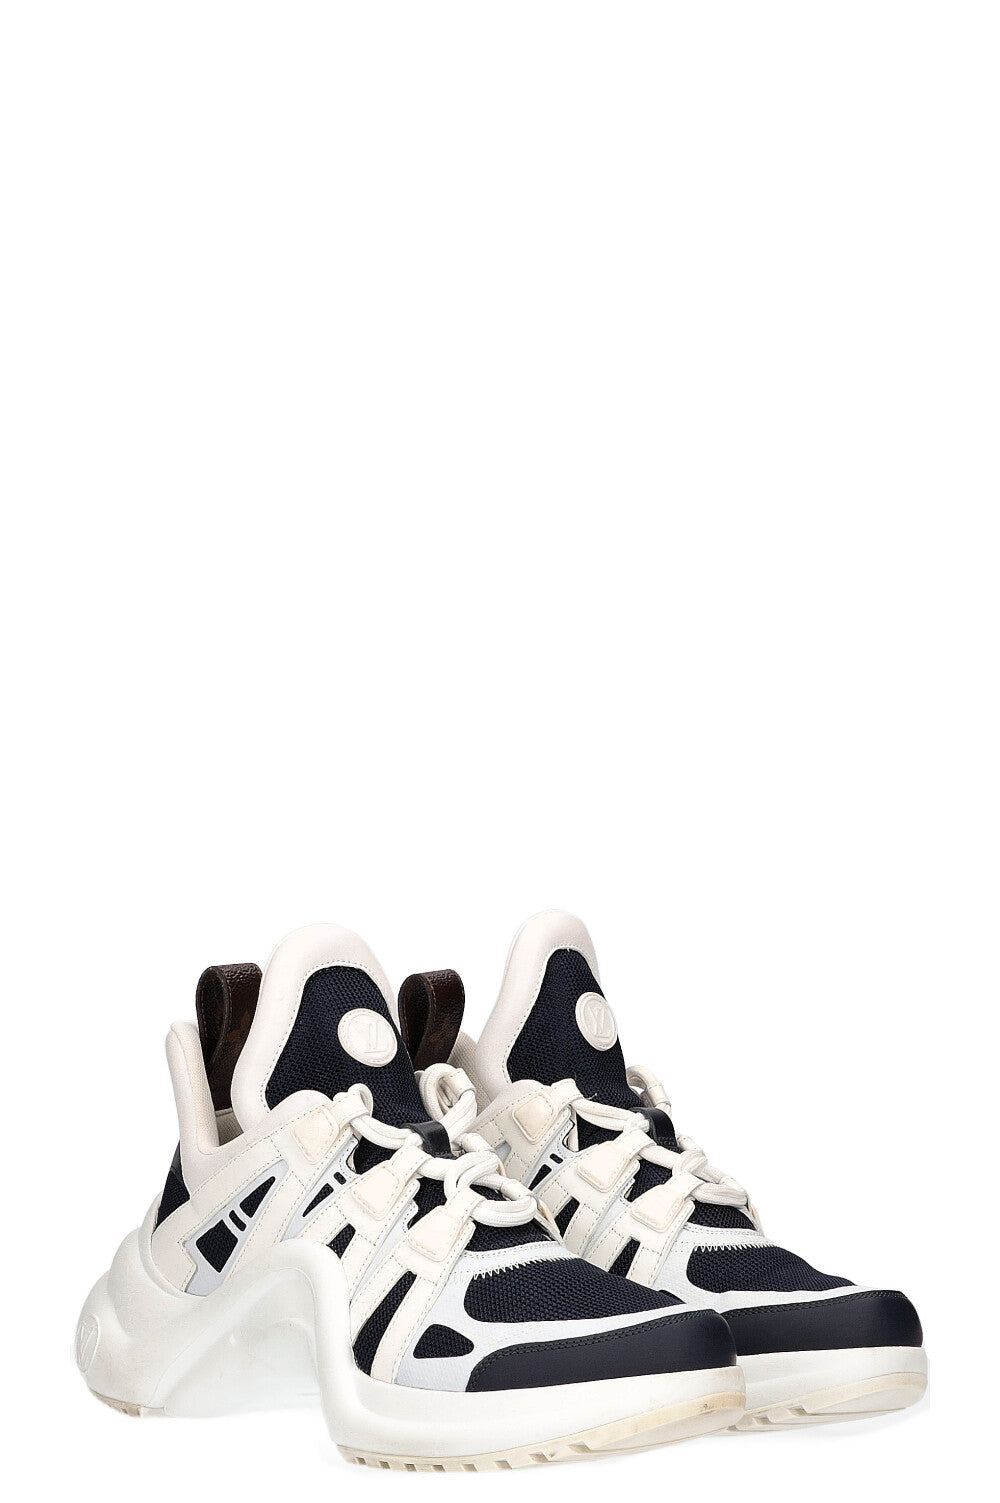 Louis Vuitton A Pair of LV Archlight Sneakers in Black